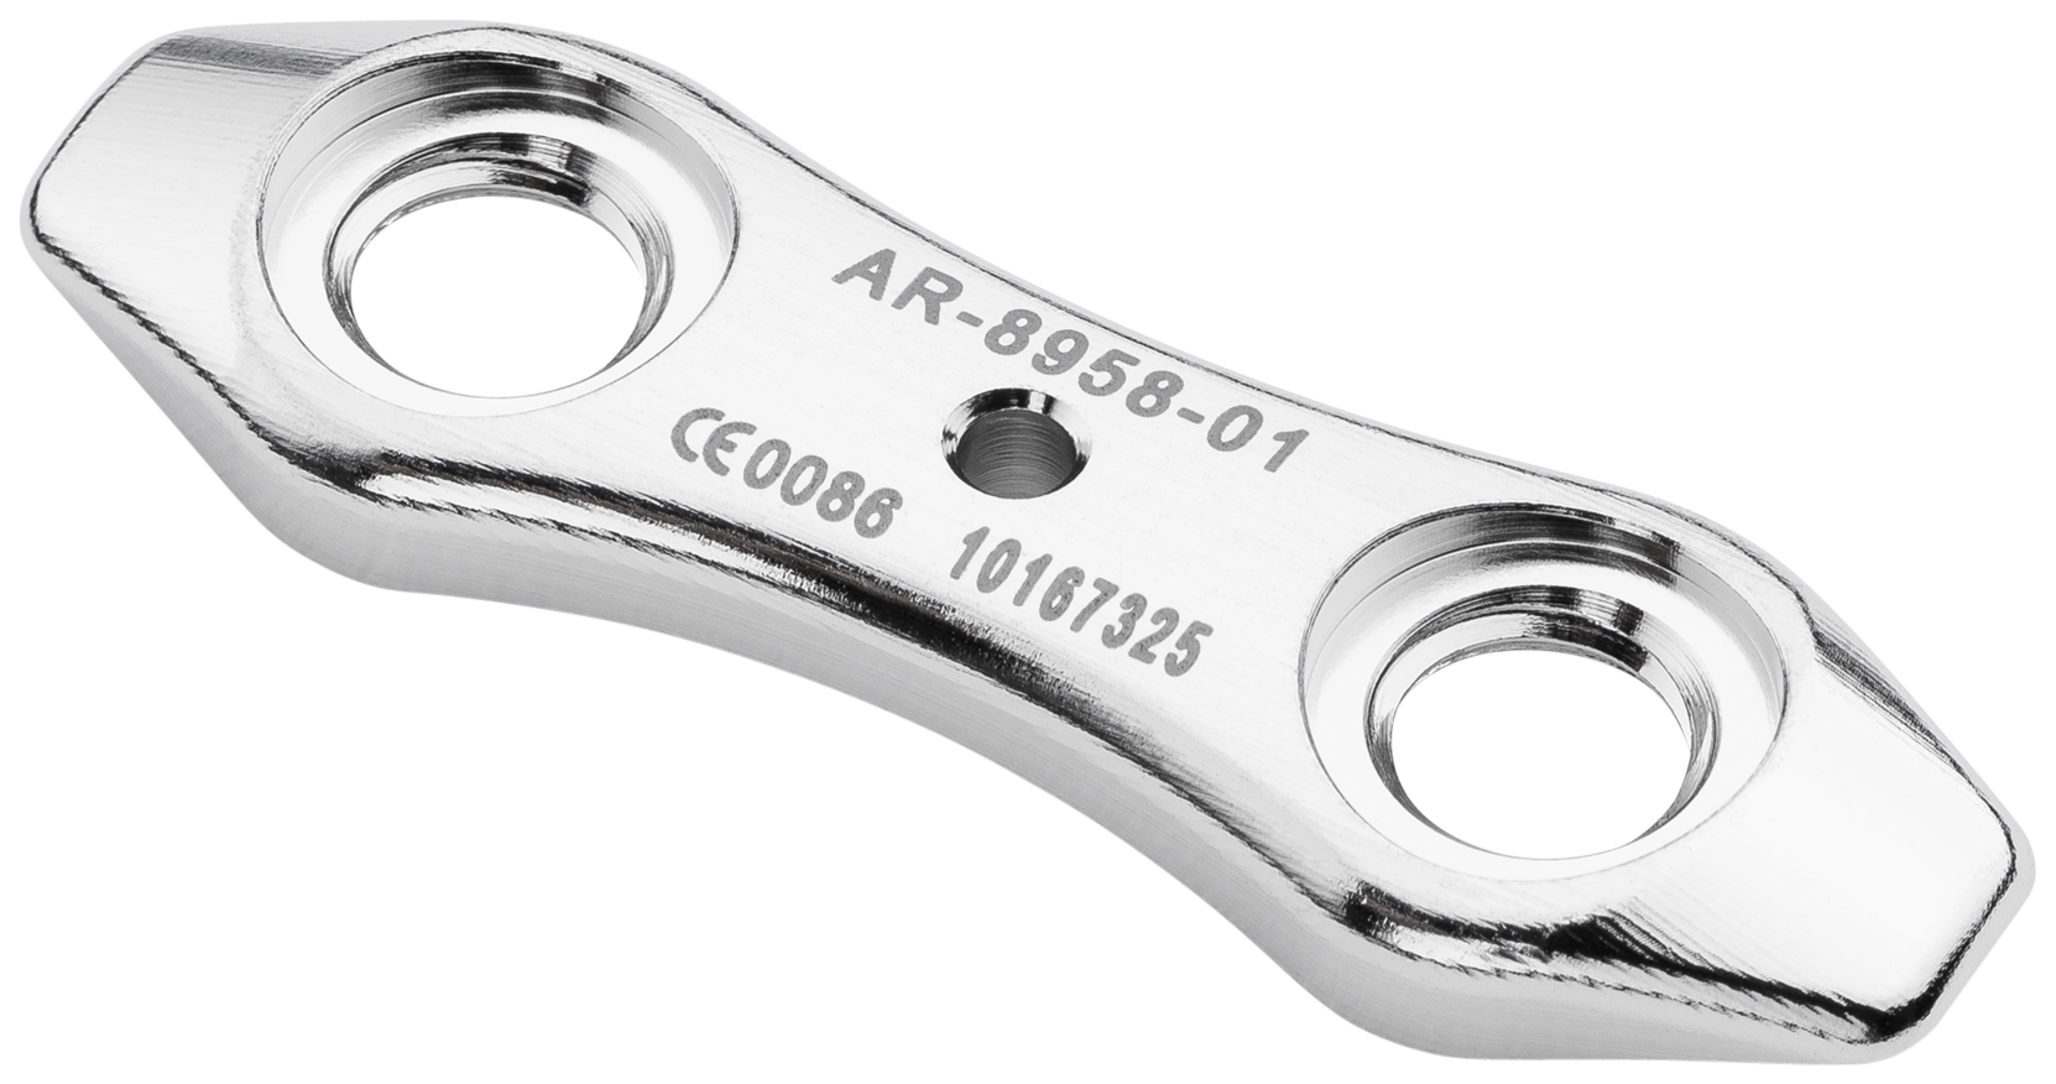 Arthrex - Syndesmosis TightRope XP, Stainless Steel - AR-8925SS